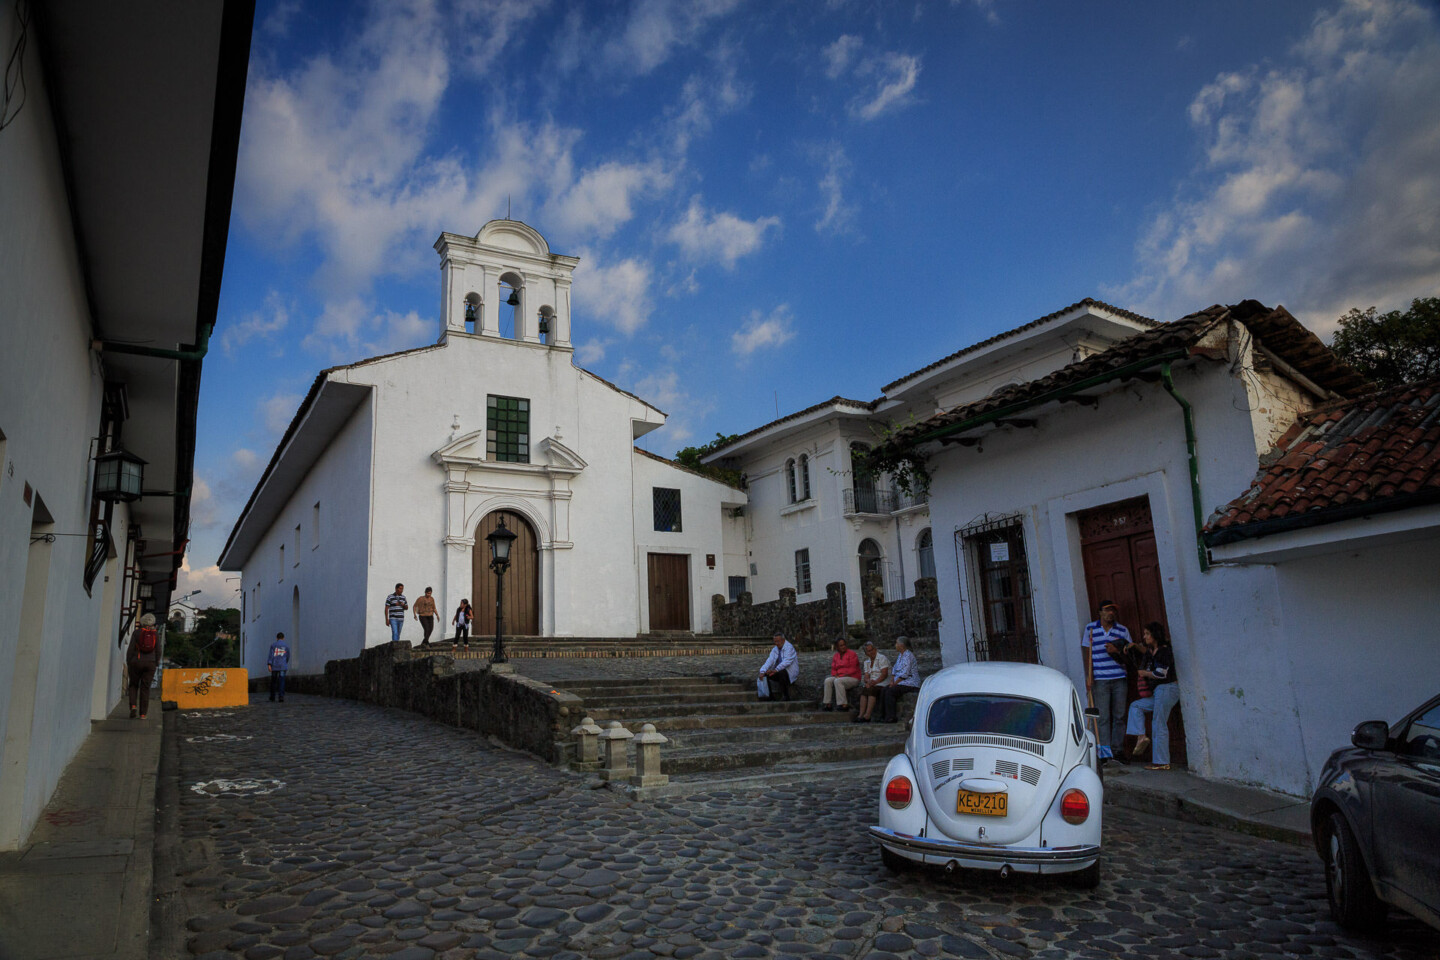 popayan colombia